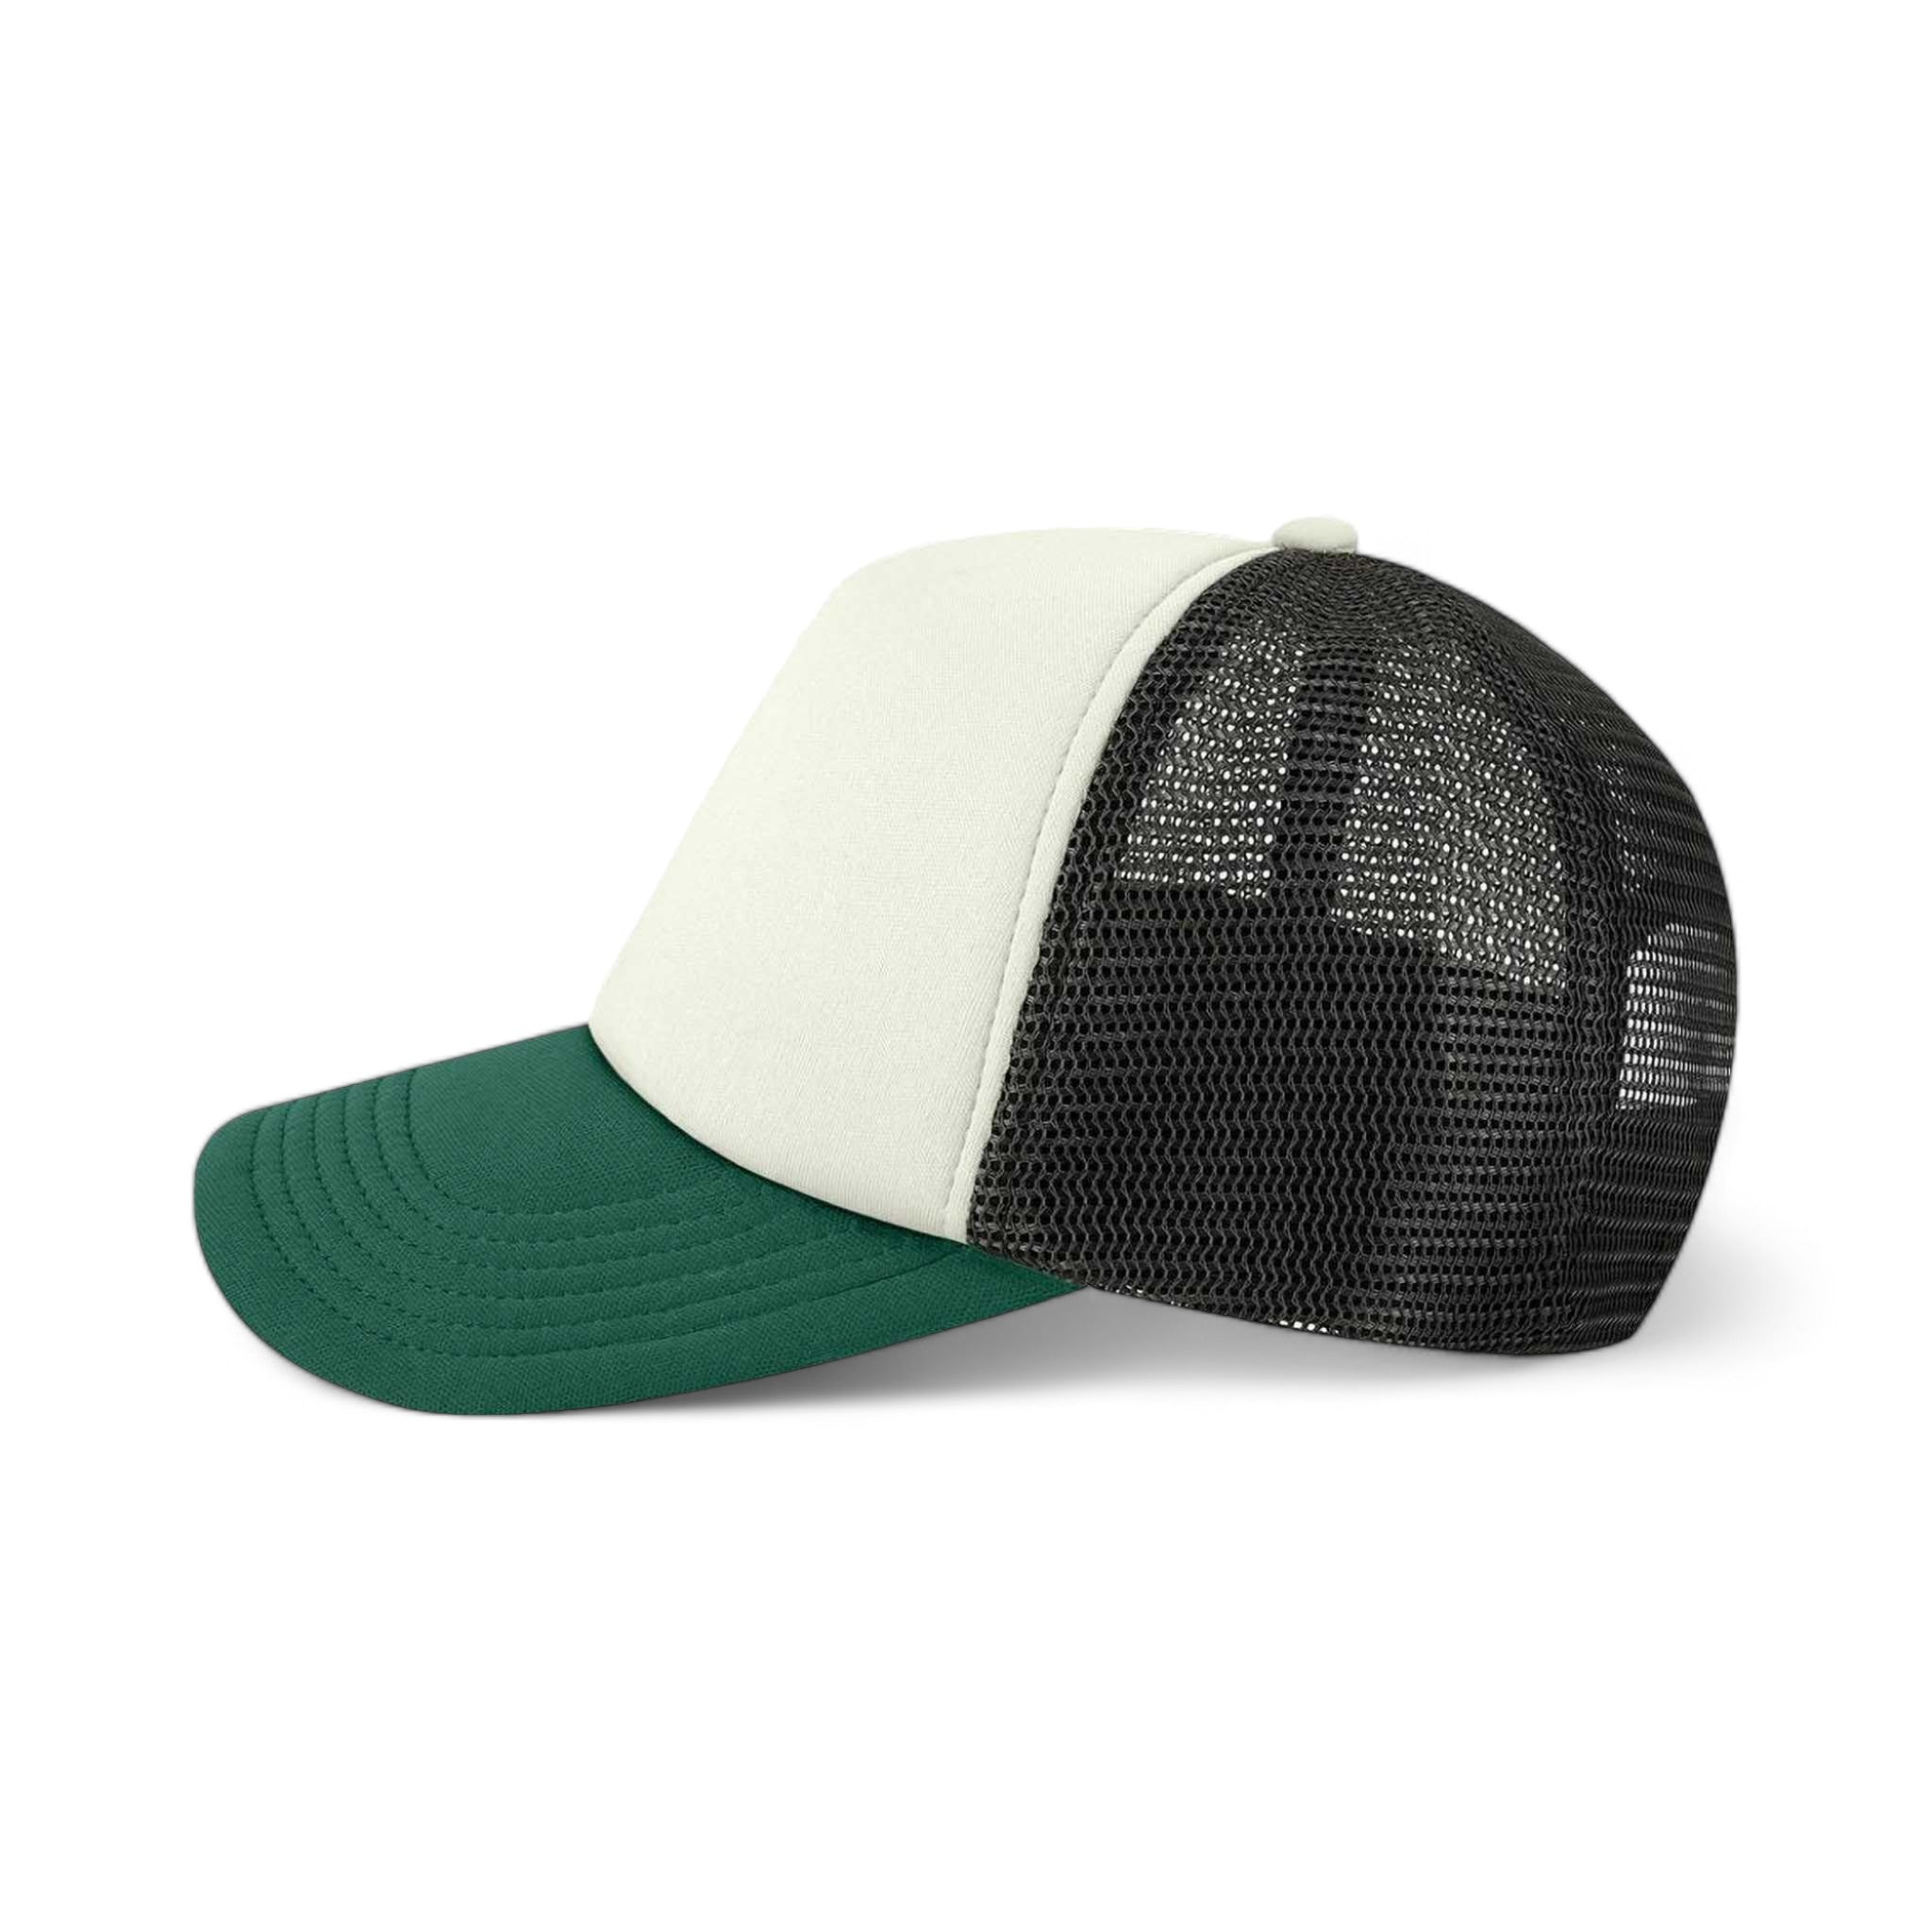 Side view of LEGACY LTA custom hat in cream, green and black